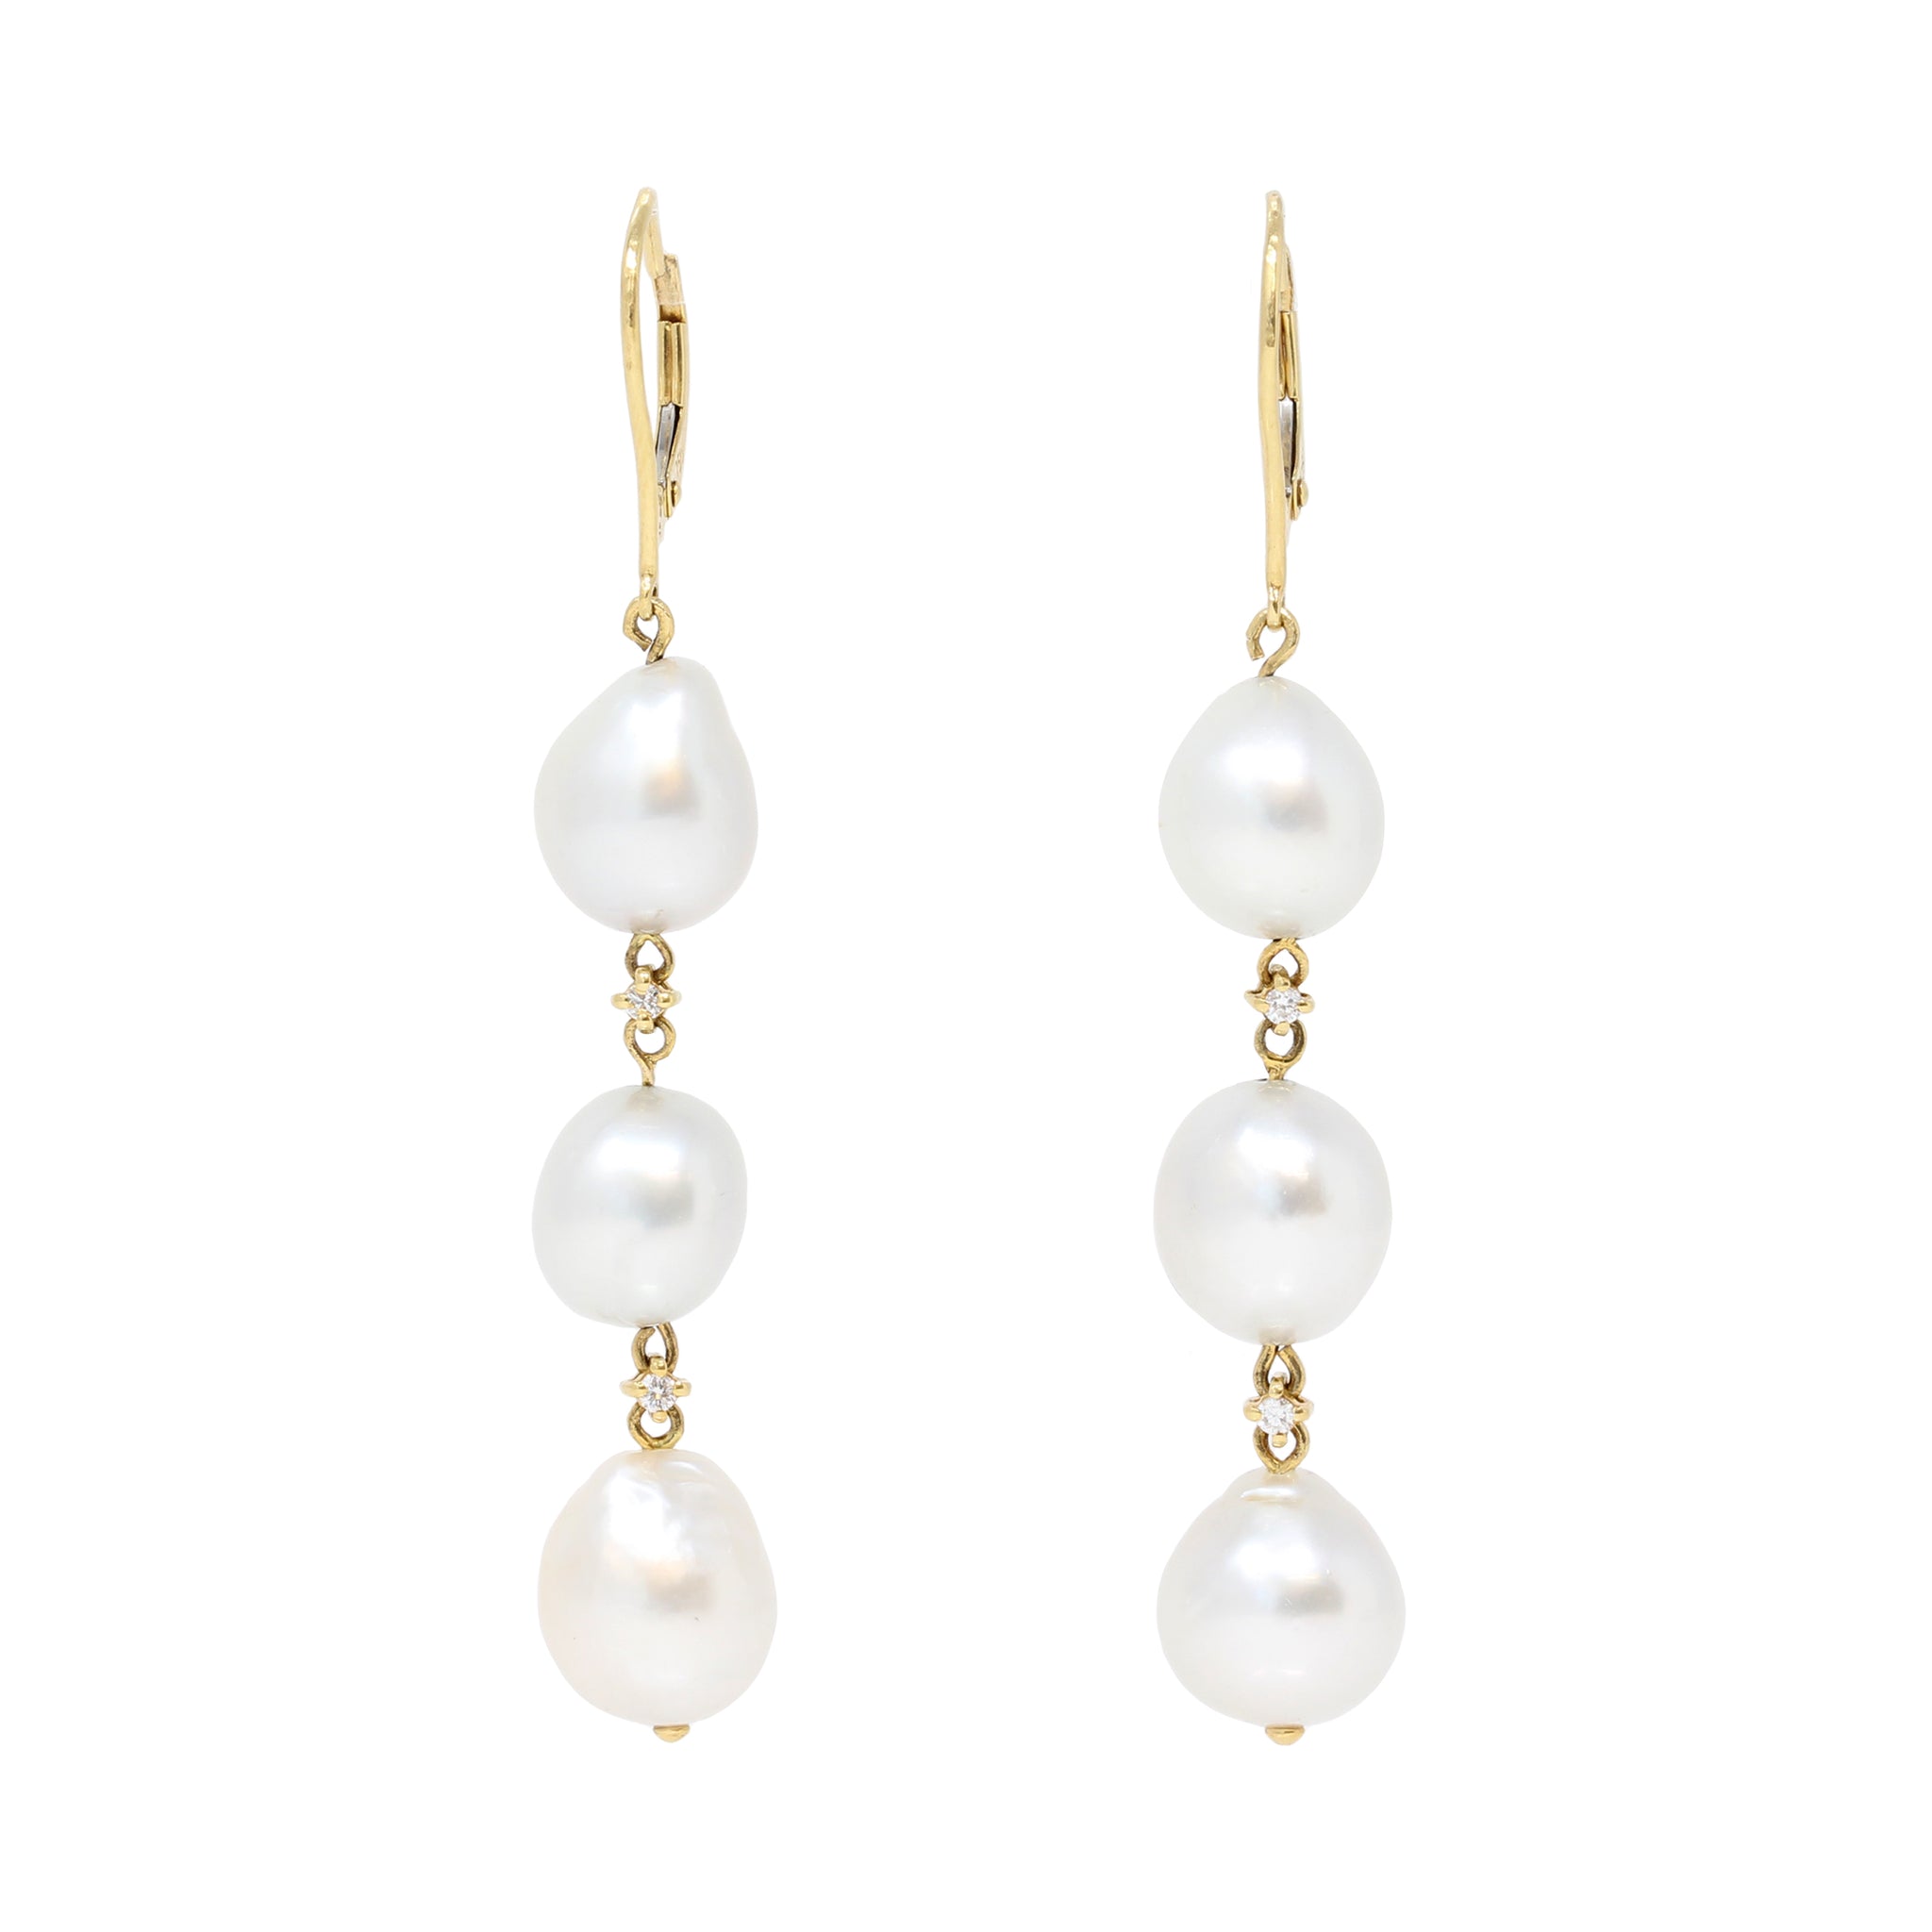 Pair of South Sea Baroque Pearls 18k Gold Dangling Earrings with Diamo ...